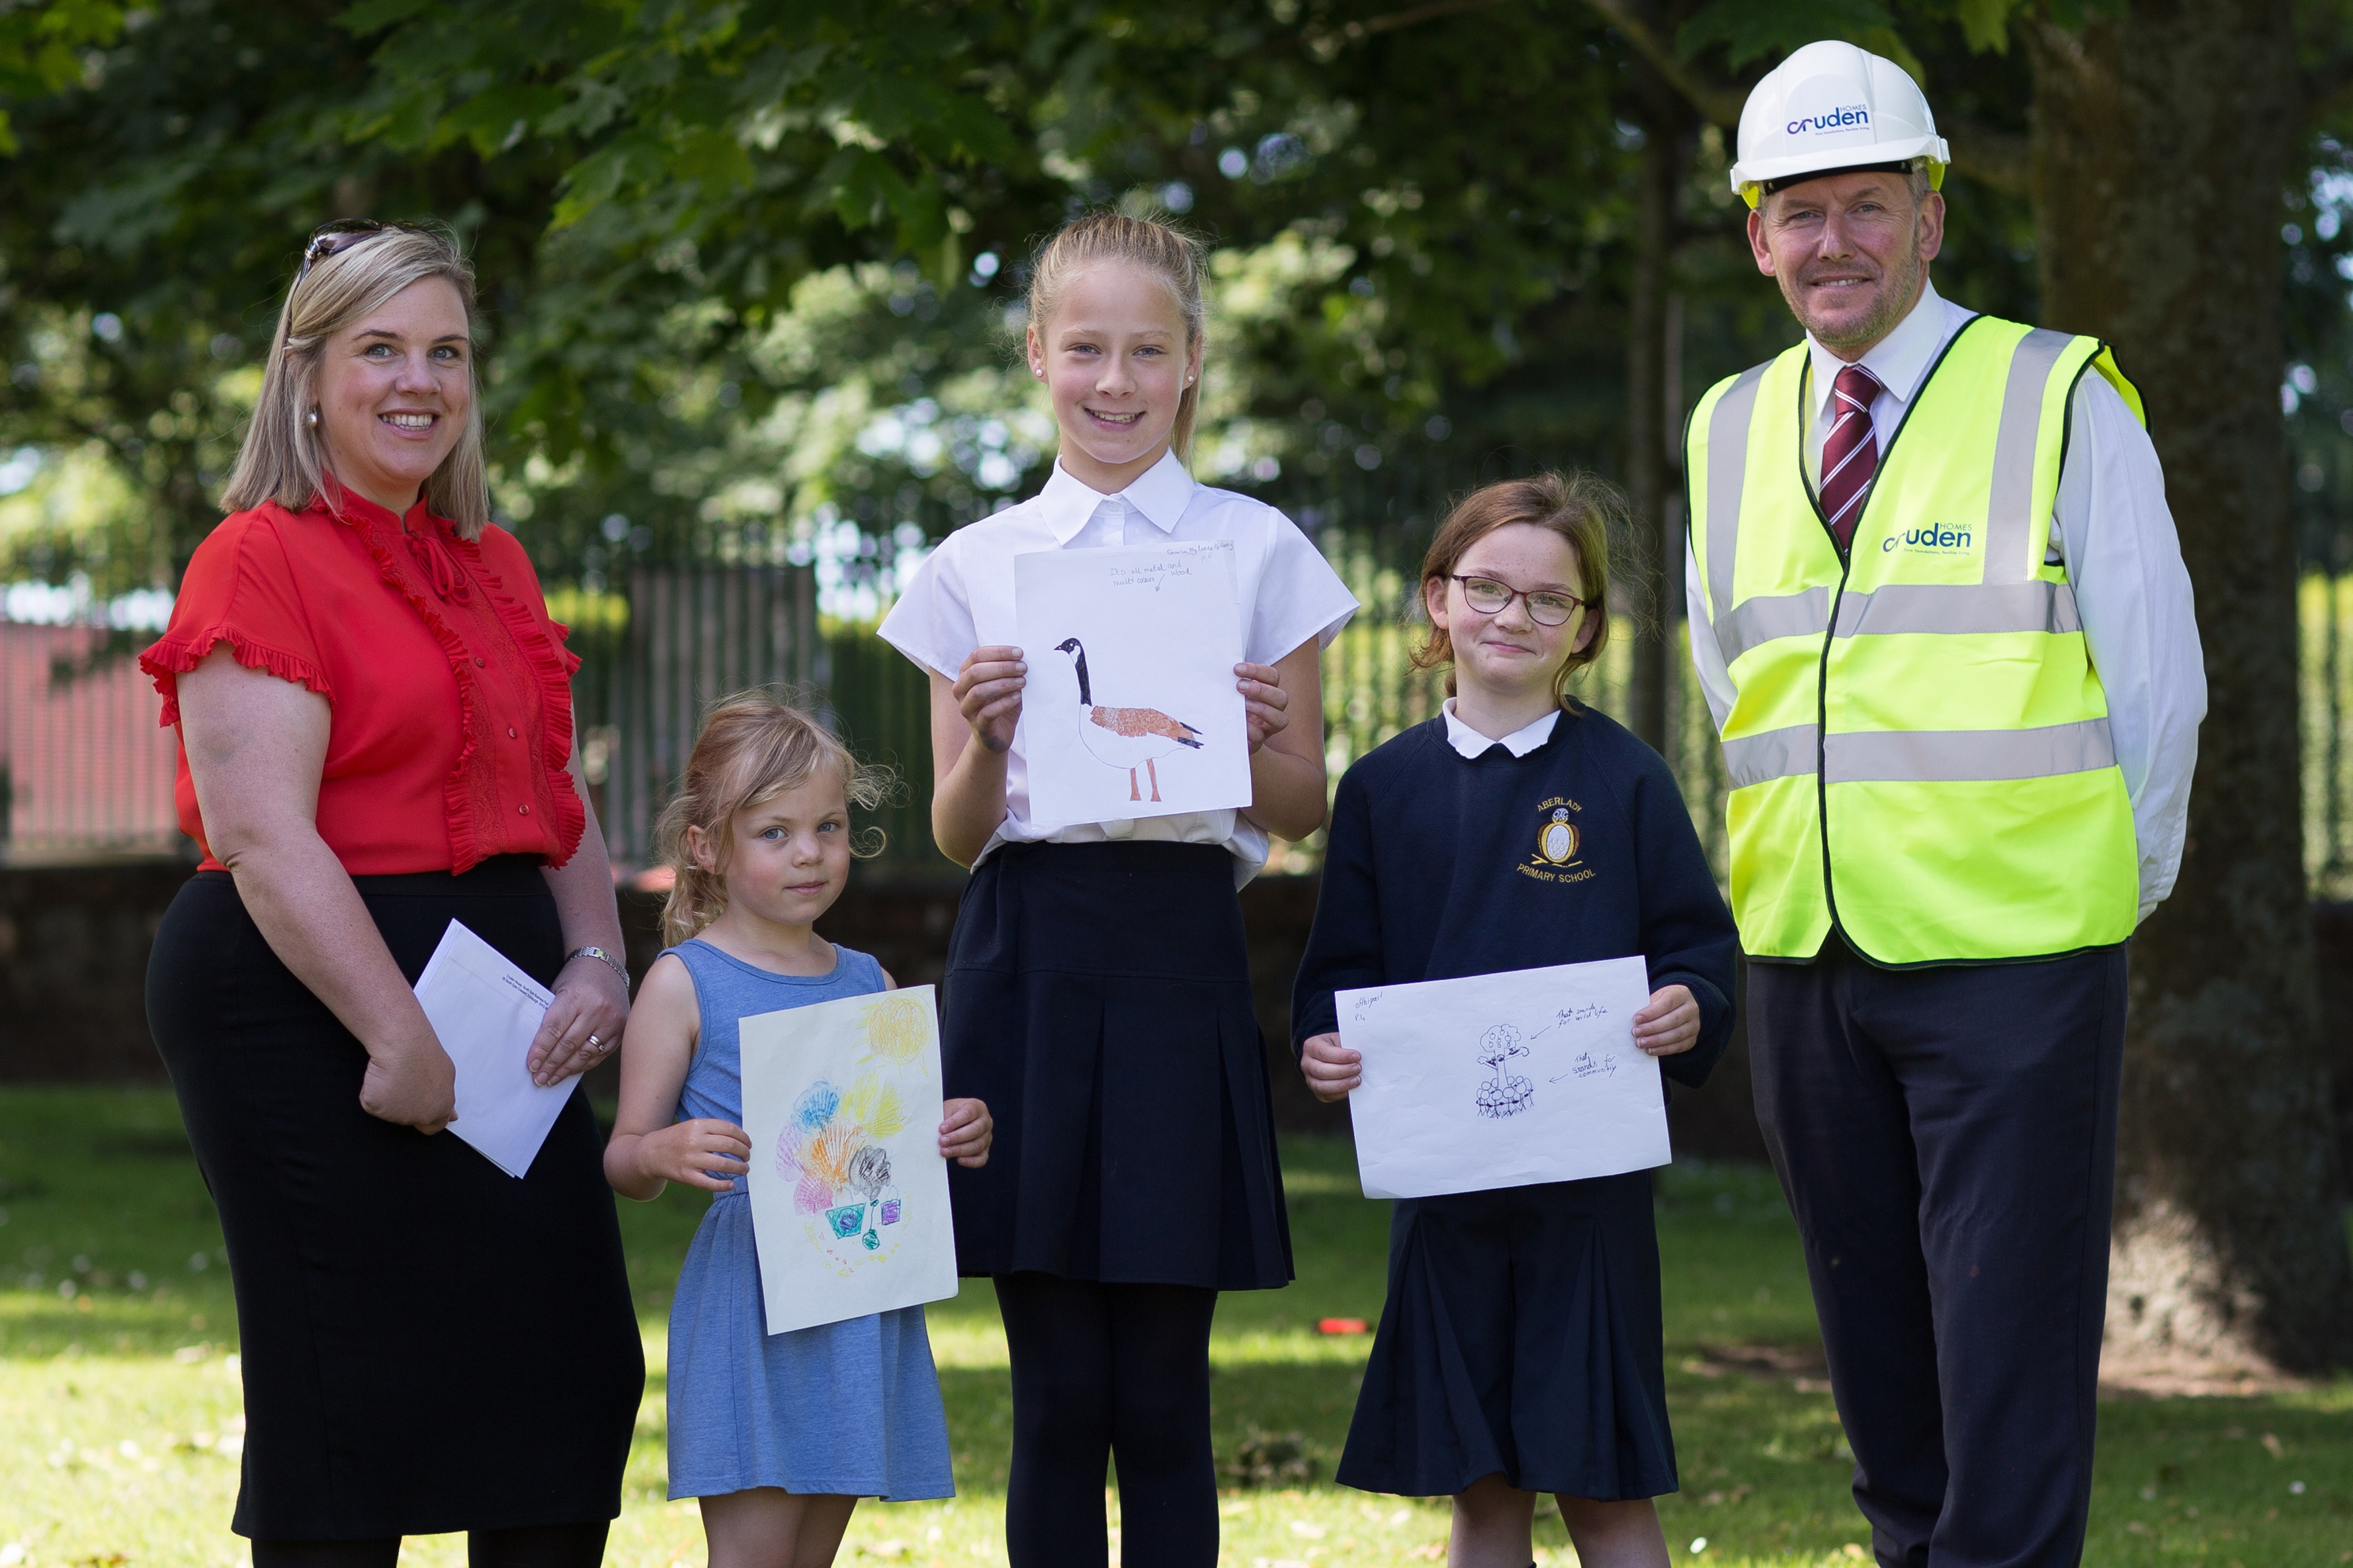 Cruden Homes’ sales and marketing director, Hazel Davies, competition runner-up, Ella, competition winner, Lotte, competition runner-up, Abigail and Cruden Homes’ contracts manager at the Meadowside development, Andy Brown, at the prize giving presentation held recently at Aberlady Primary School.